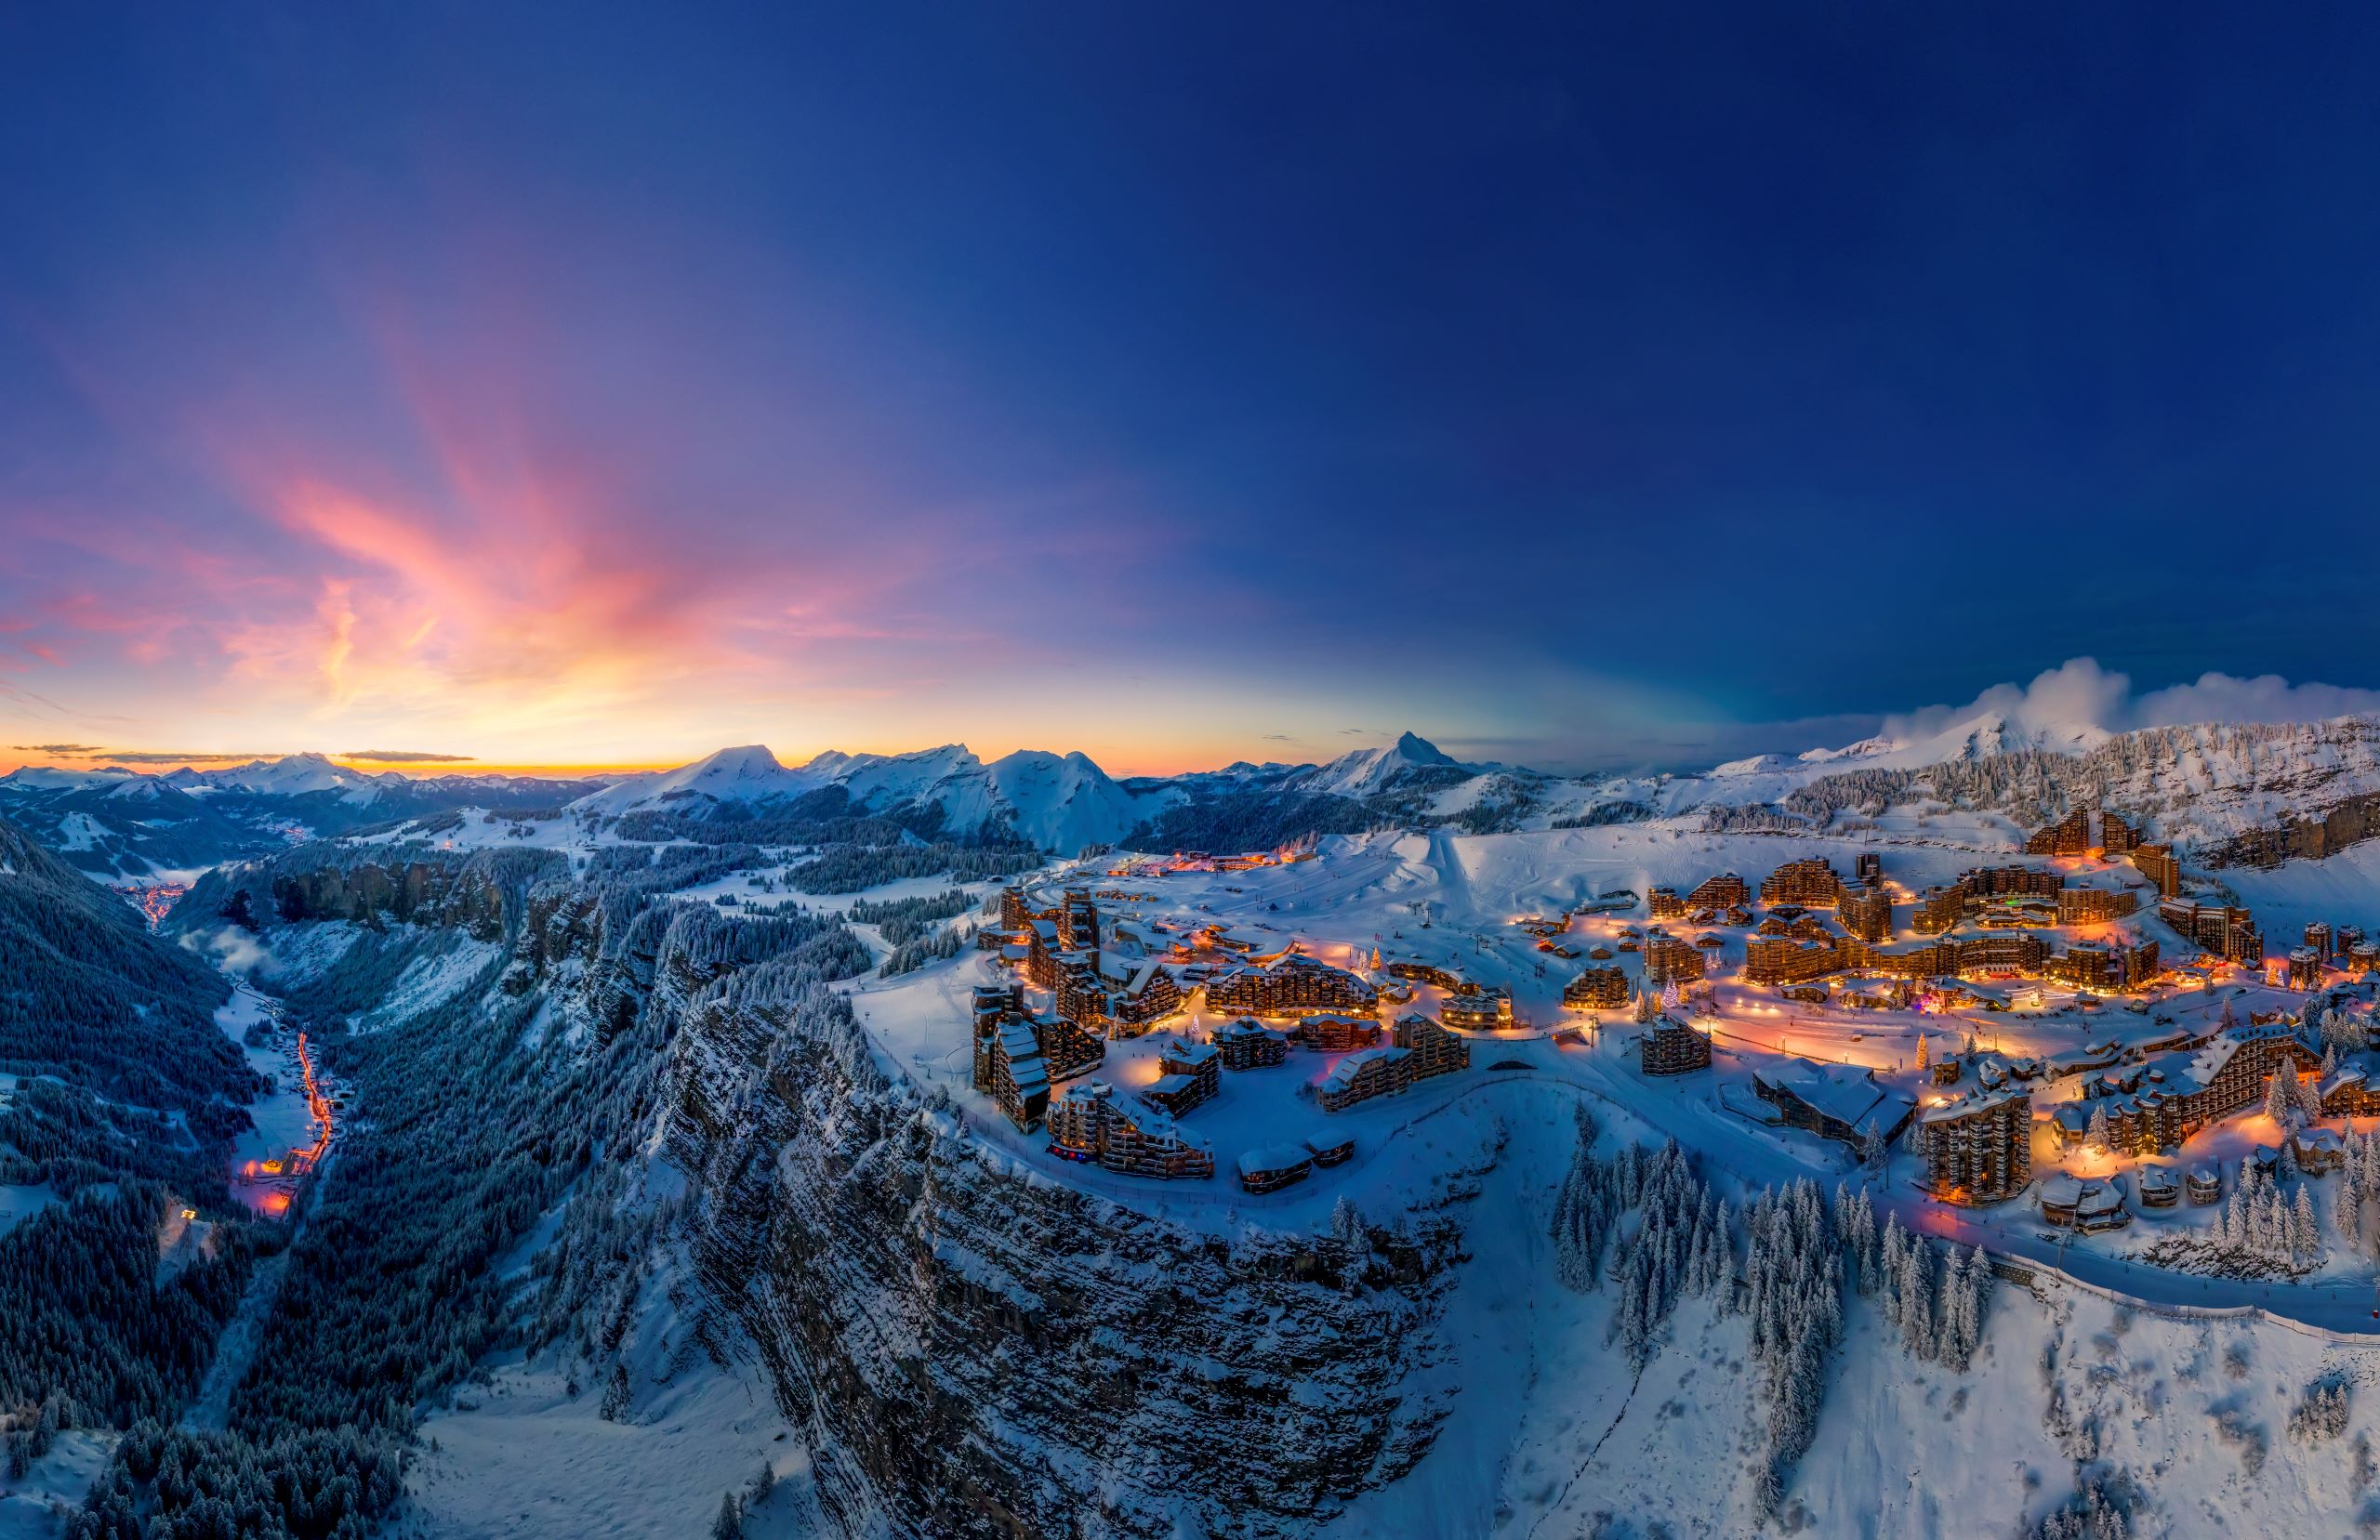 The cliff top village of Avoriaz at night by Poppr VR